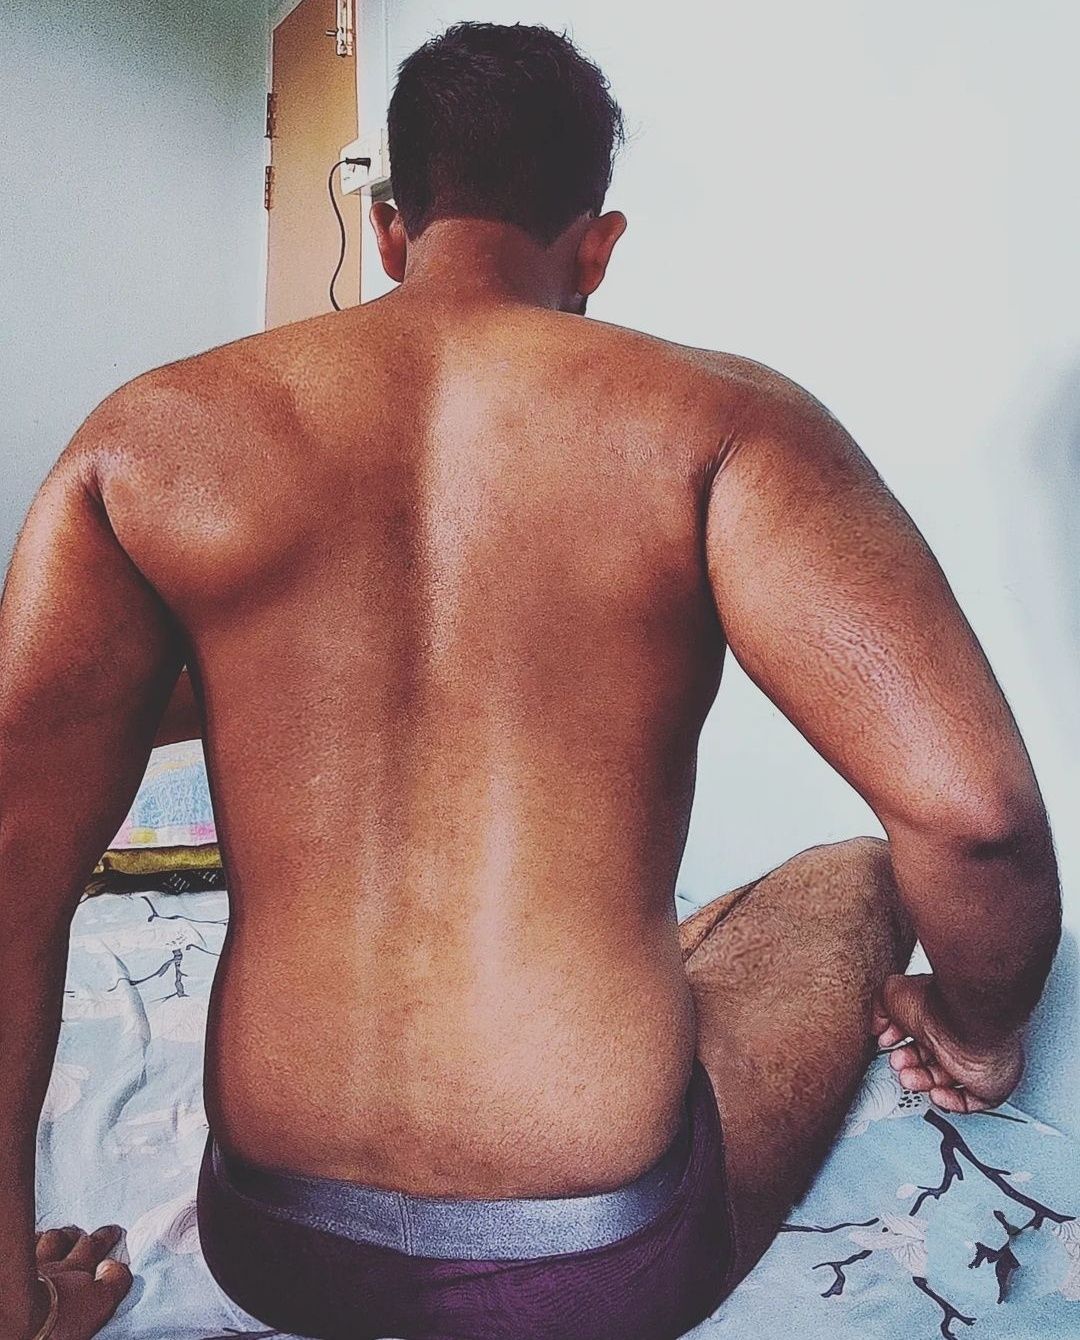 Weekly changes of my back side